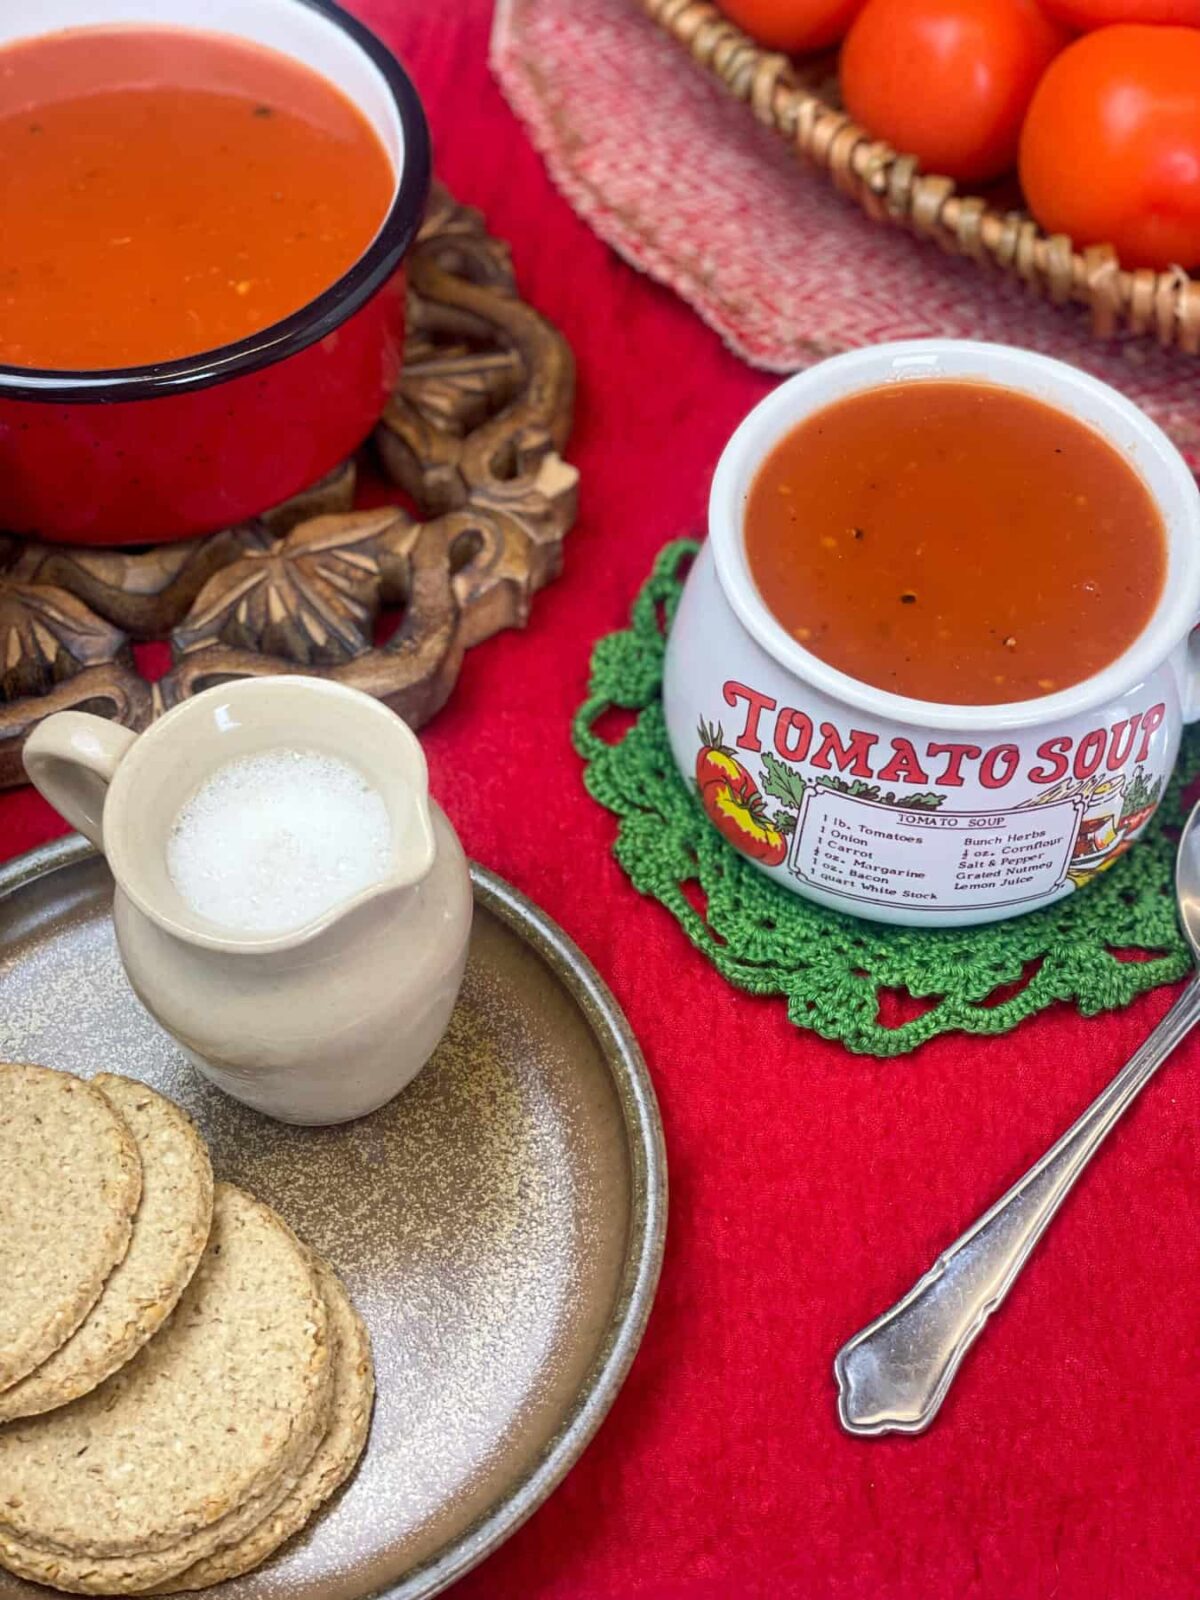 mug of tomato soup on green doily, brown plate with small milk jug and oatcakes, red pot with tomato soup to side on a brown trivet, basket to tomatoes to side, red tablecloth.